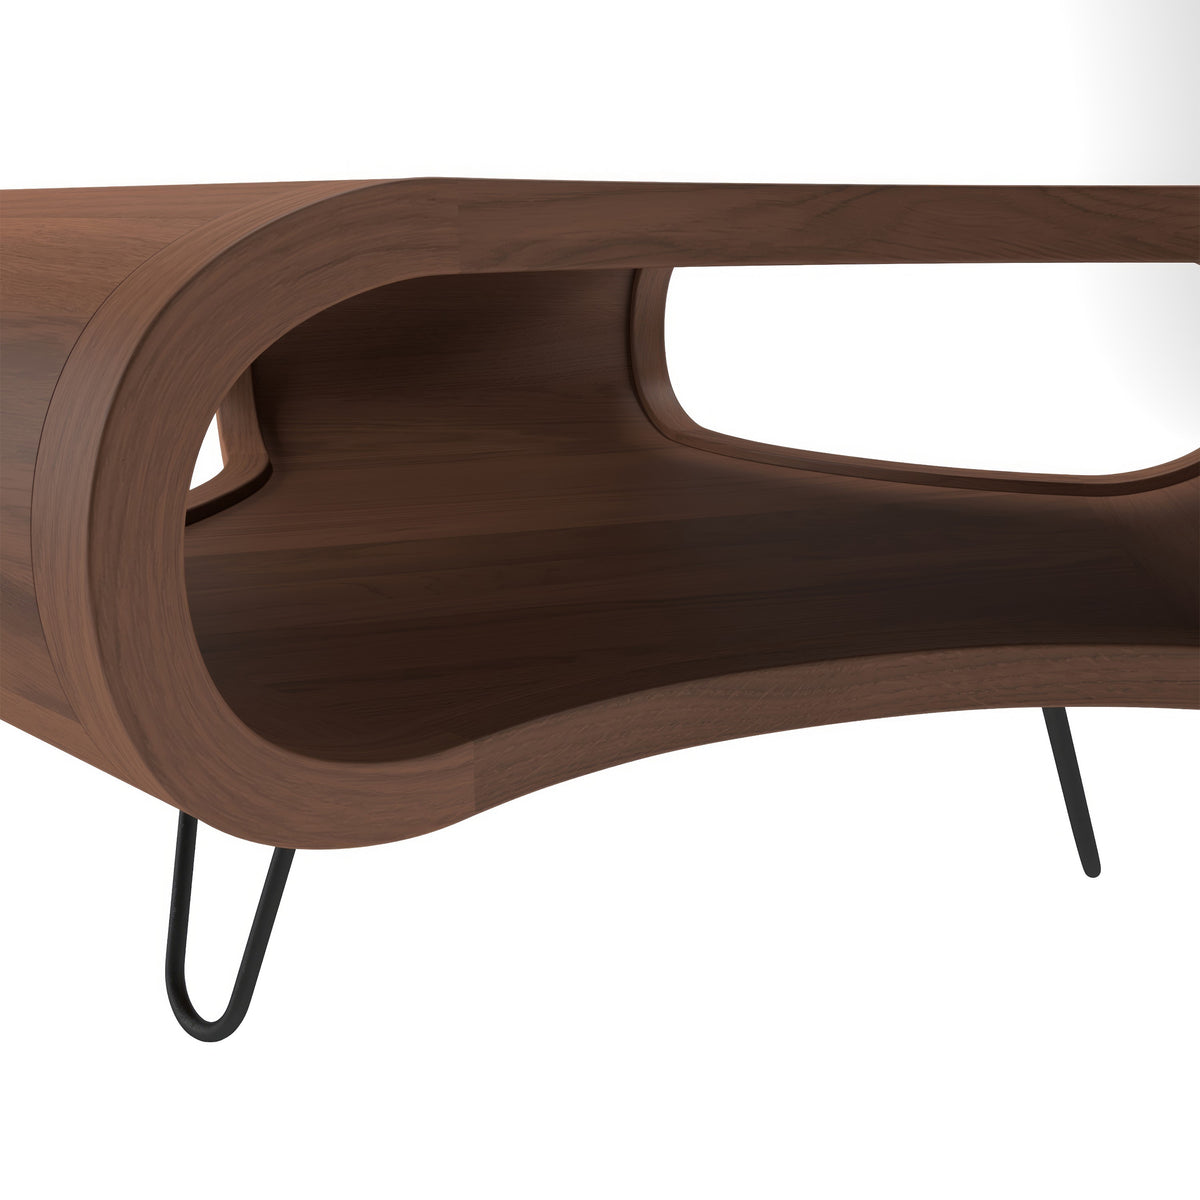 37 Inch Coffee Table, Handcrafted Curved Hexagon Shape with Open Shelf, Natural Brown Acacia Wood, Iron Legs - UPT-310273